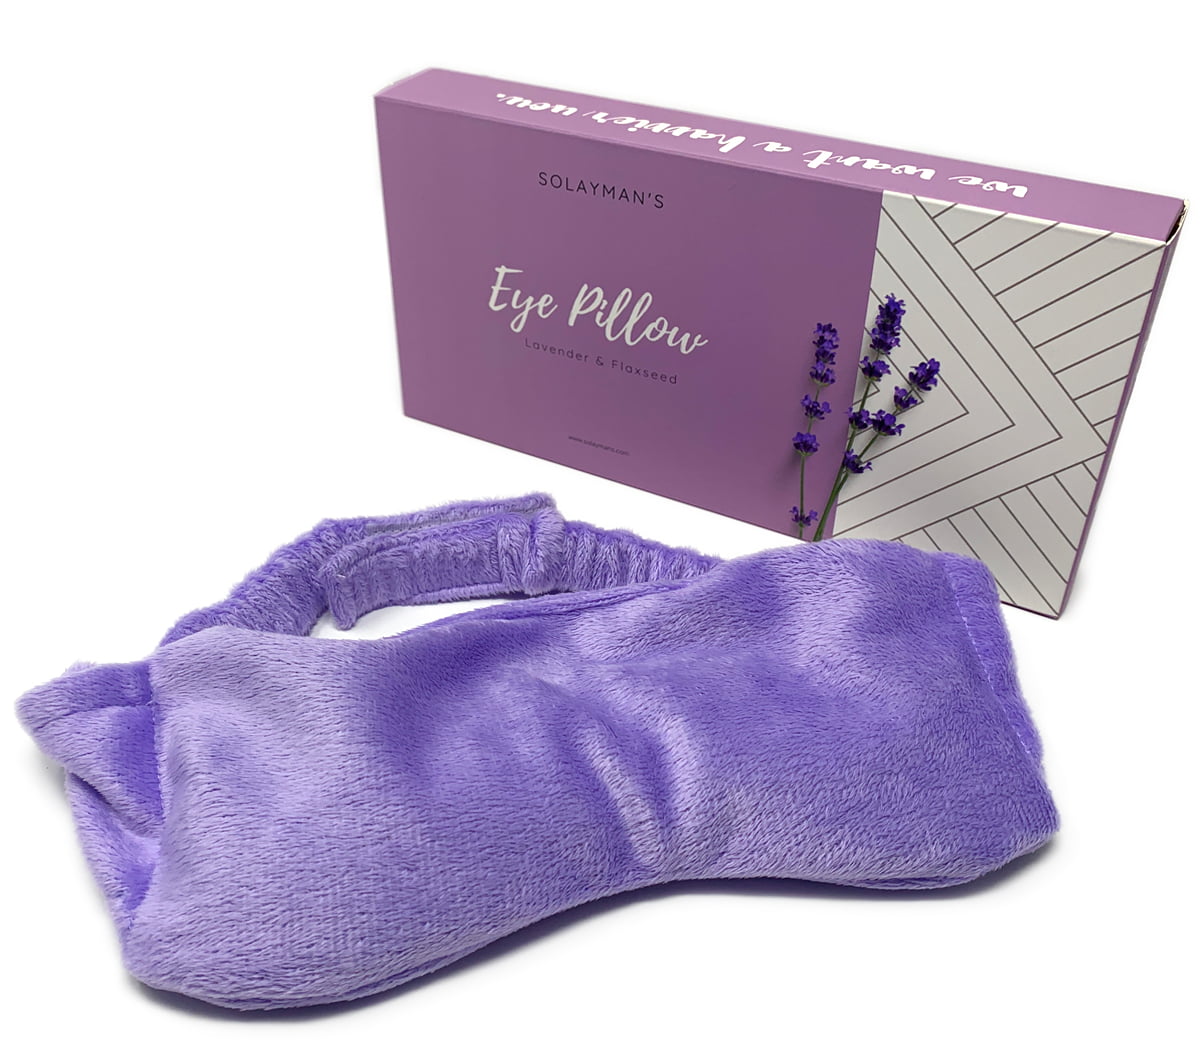 Made in USA by Happy Wraps Lavender Eye Pillow Free Gift Eye Mask for Sleeping Onyx Multi Use Hot Cold Eye Pillow for Yoga Migraine and Stress Relief Yoga Eye Pillow Lavender 